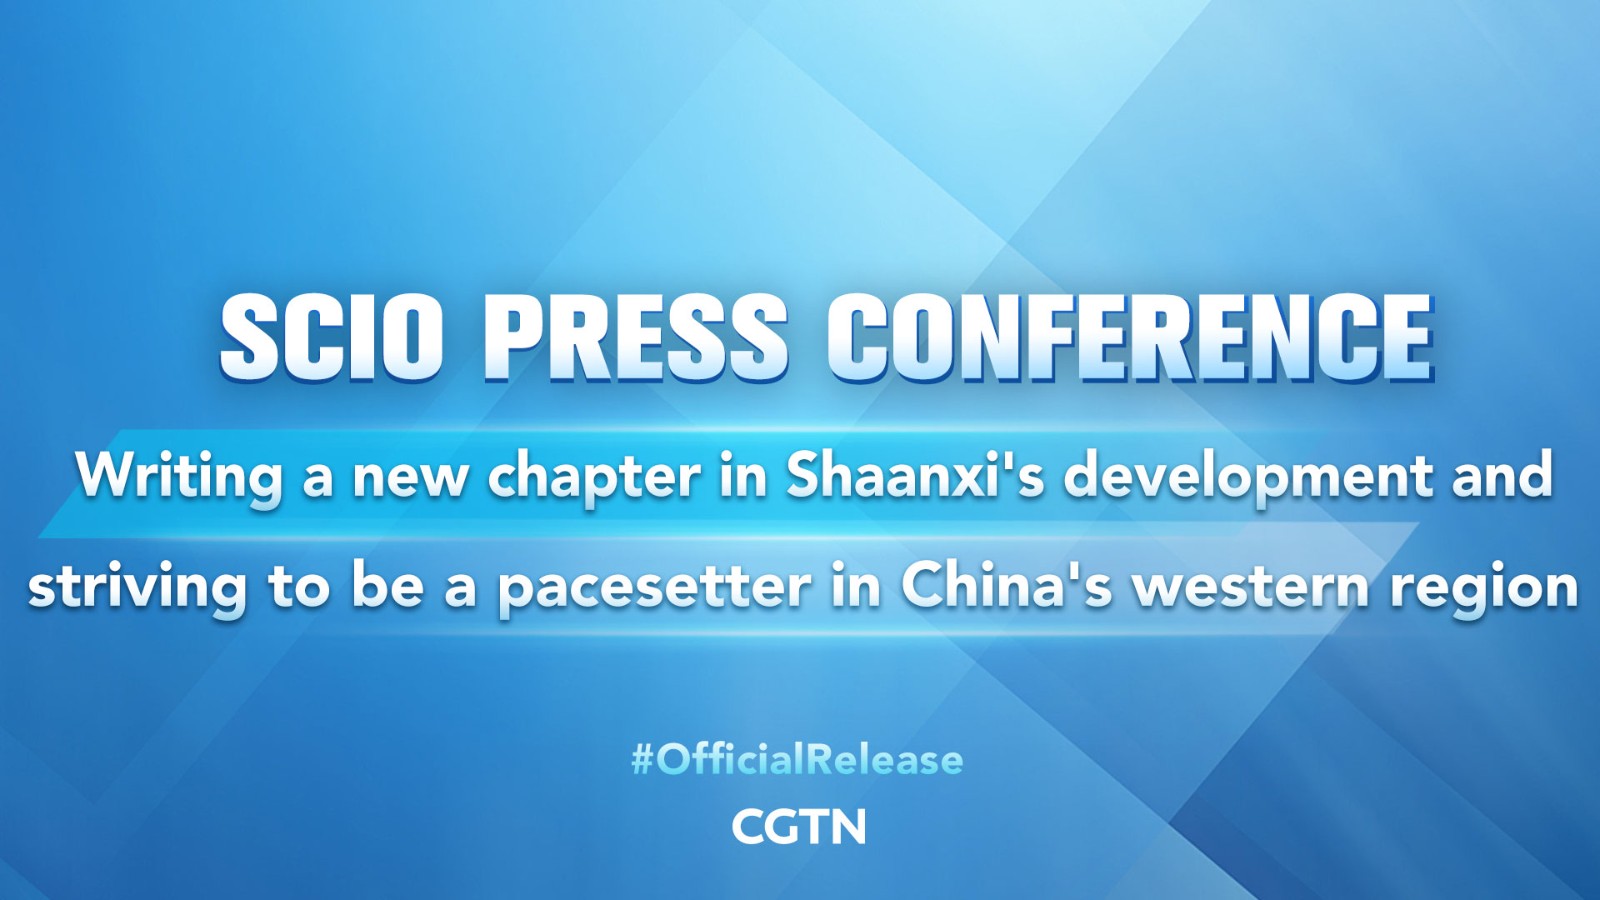 Live: SCIO press conference on writing a new chapter in Shaanxi's development and striving to be a pacesetter in China's western region